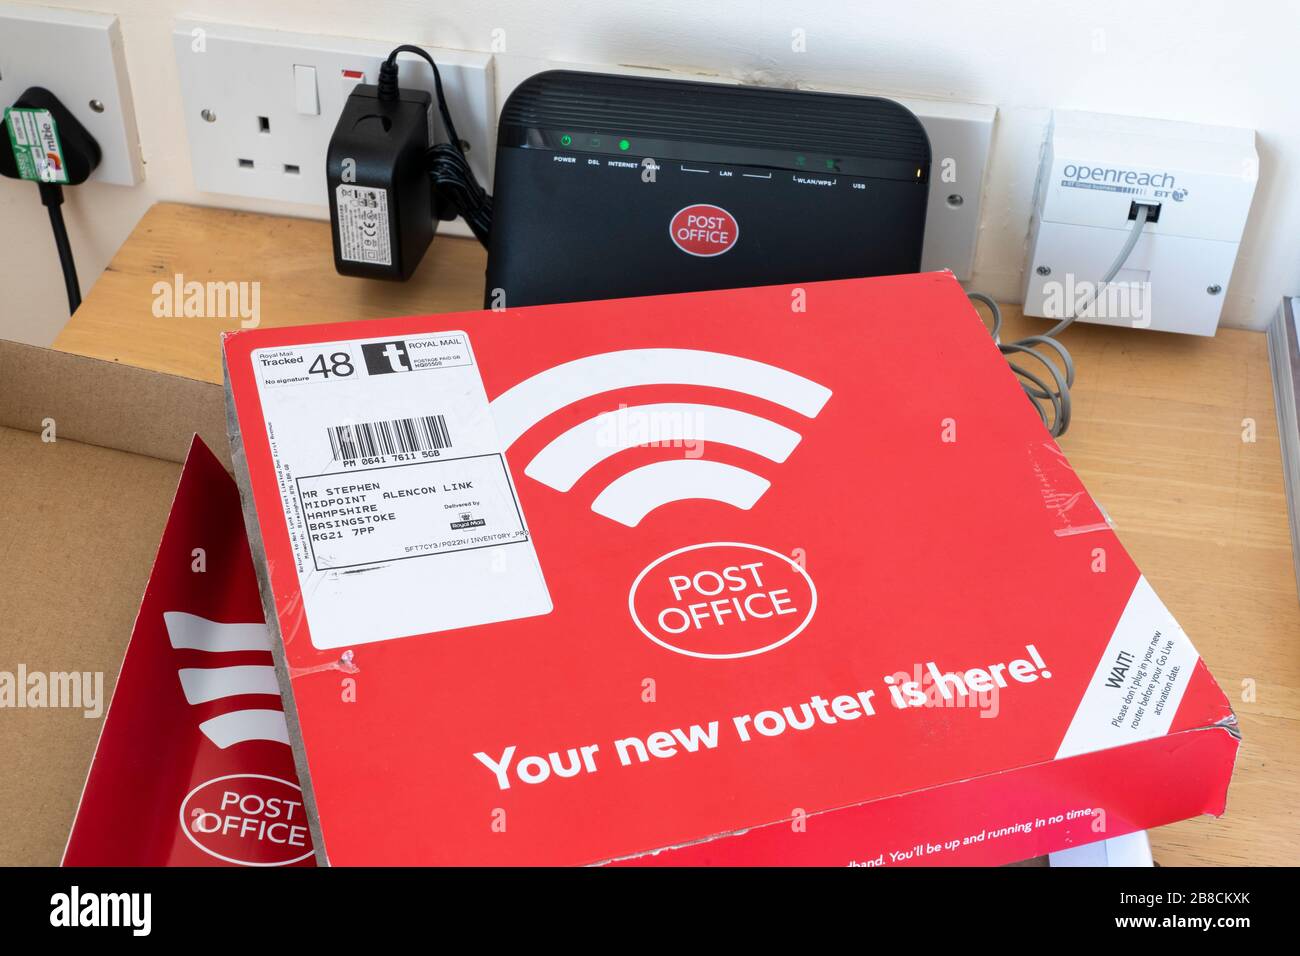 A broadband internet router connected to a wall socket sent by the Post Office - an internet provider -  to a home user in the UK Stock Photo